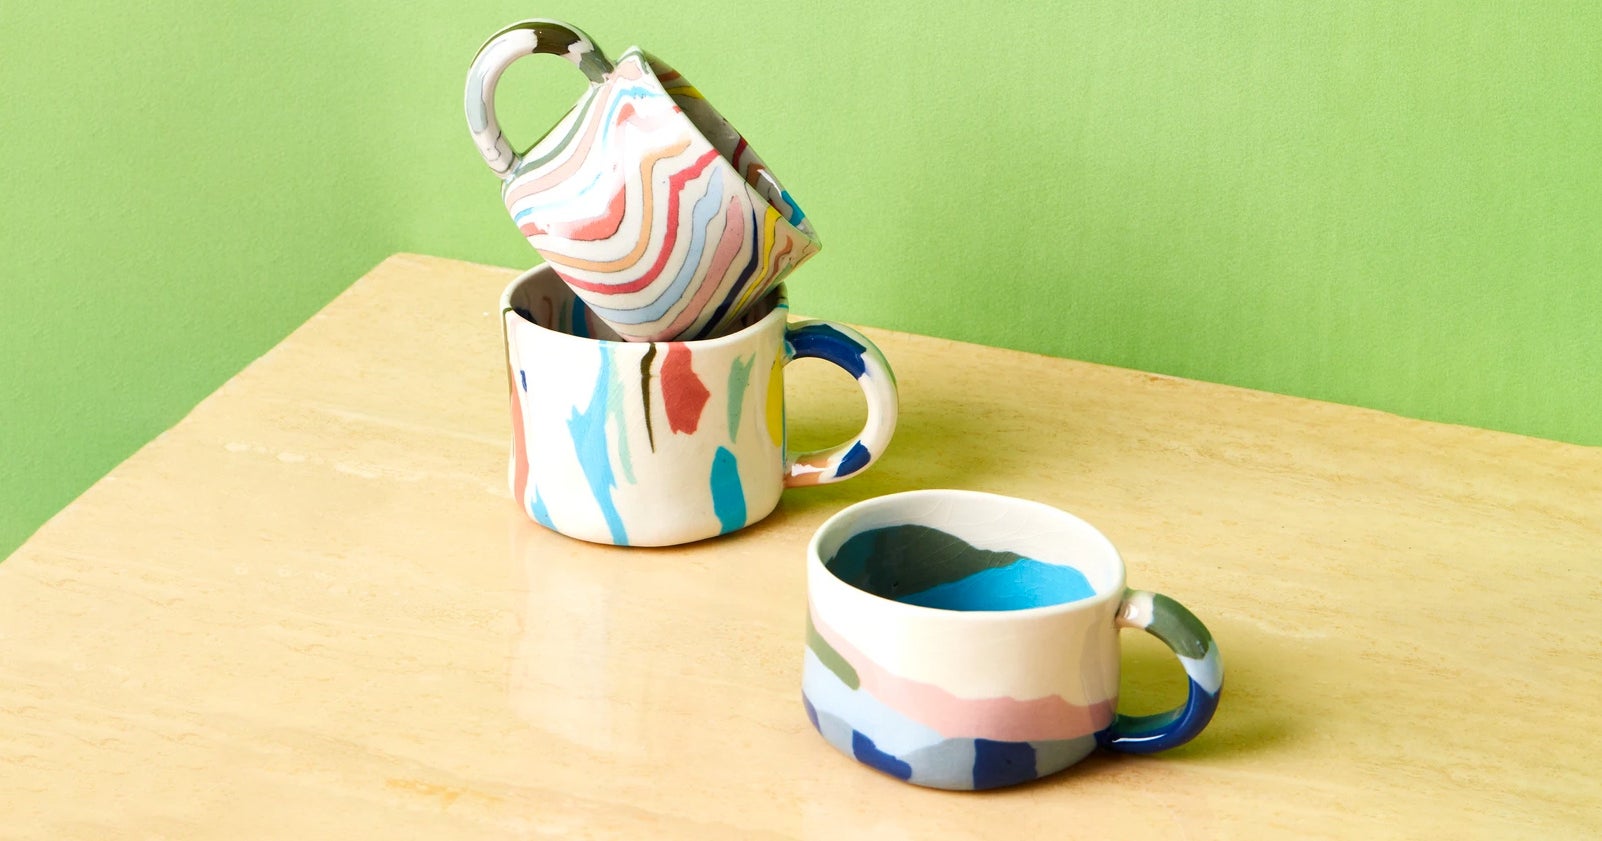 9 Handmade Ceramic Coffee Mugs From Independent Makers - The Good